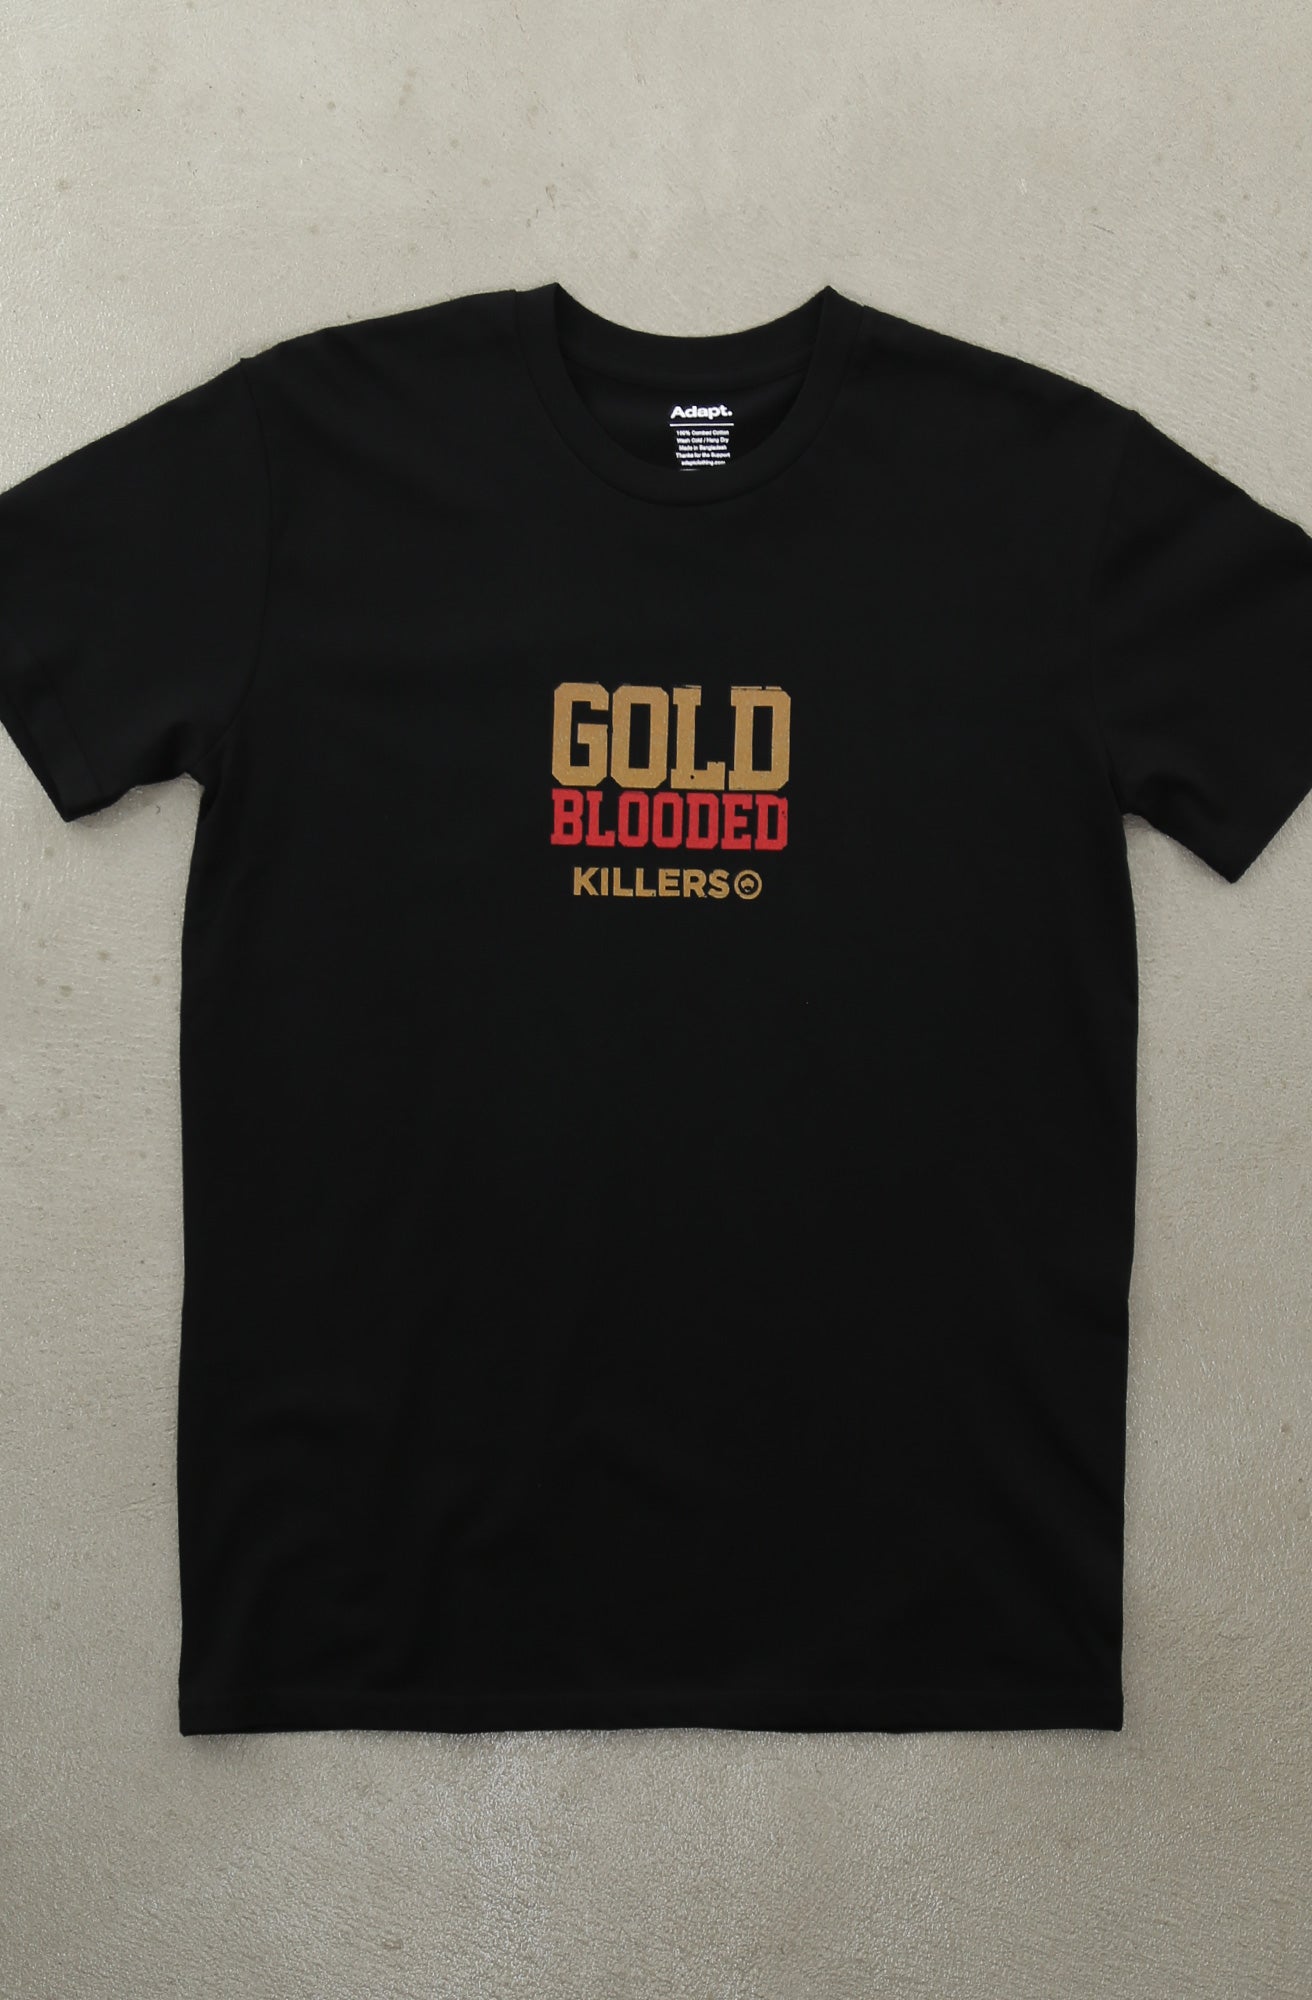 MIGHTYKILLERS X Adapt :: Gold Blooded Killers (Men's Black/Red A1 Tee)